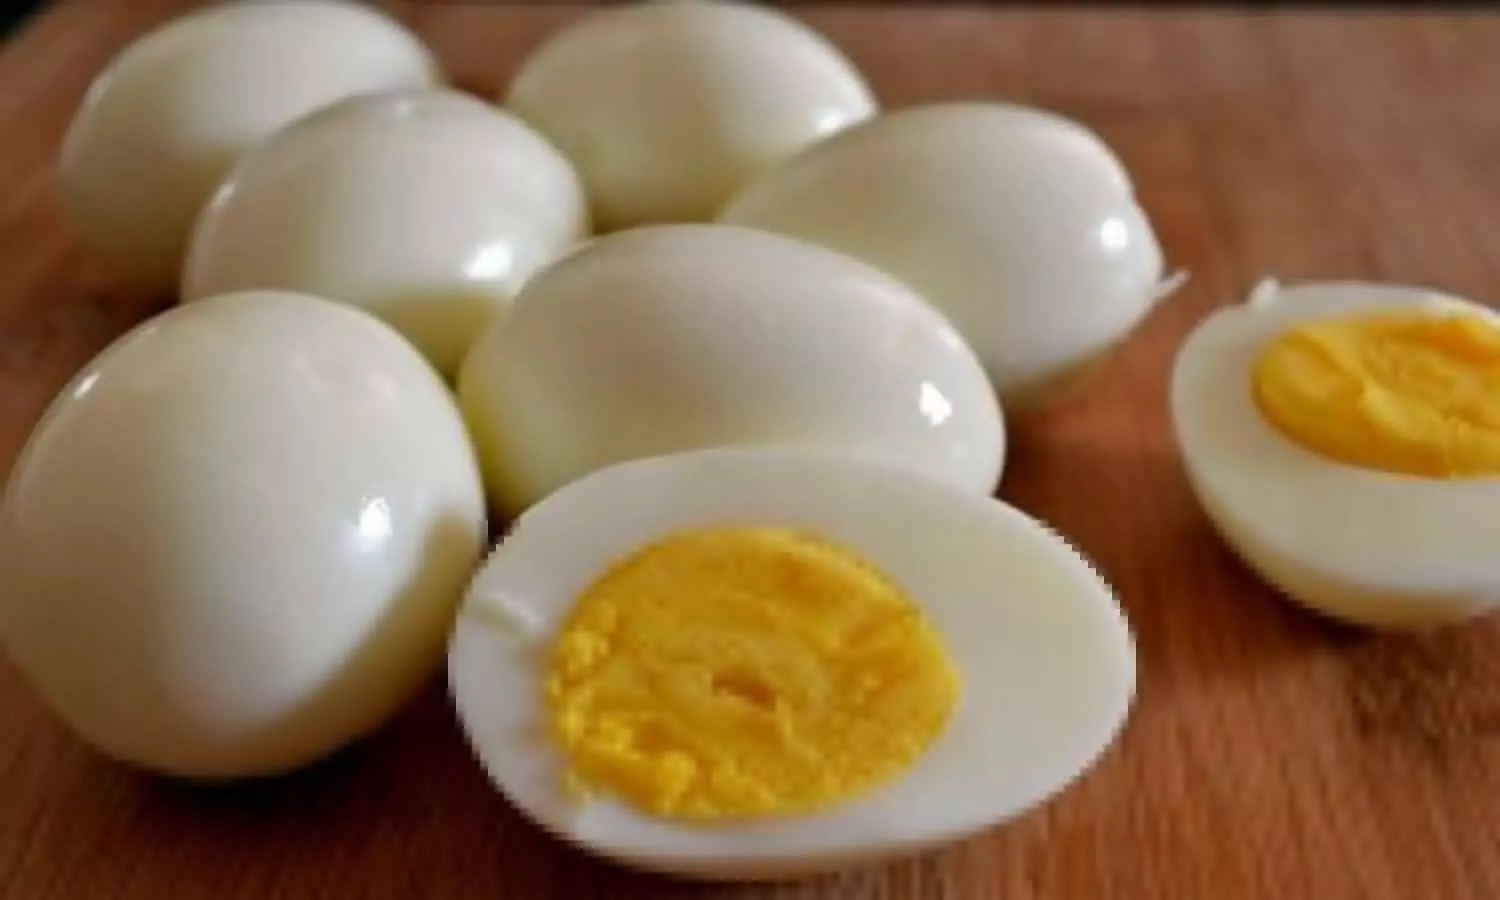 Eating eggs increases sex power